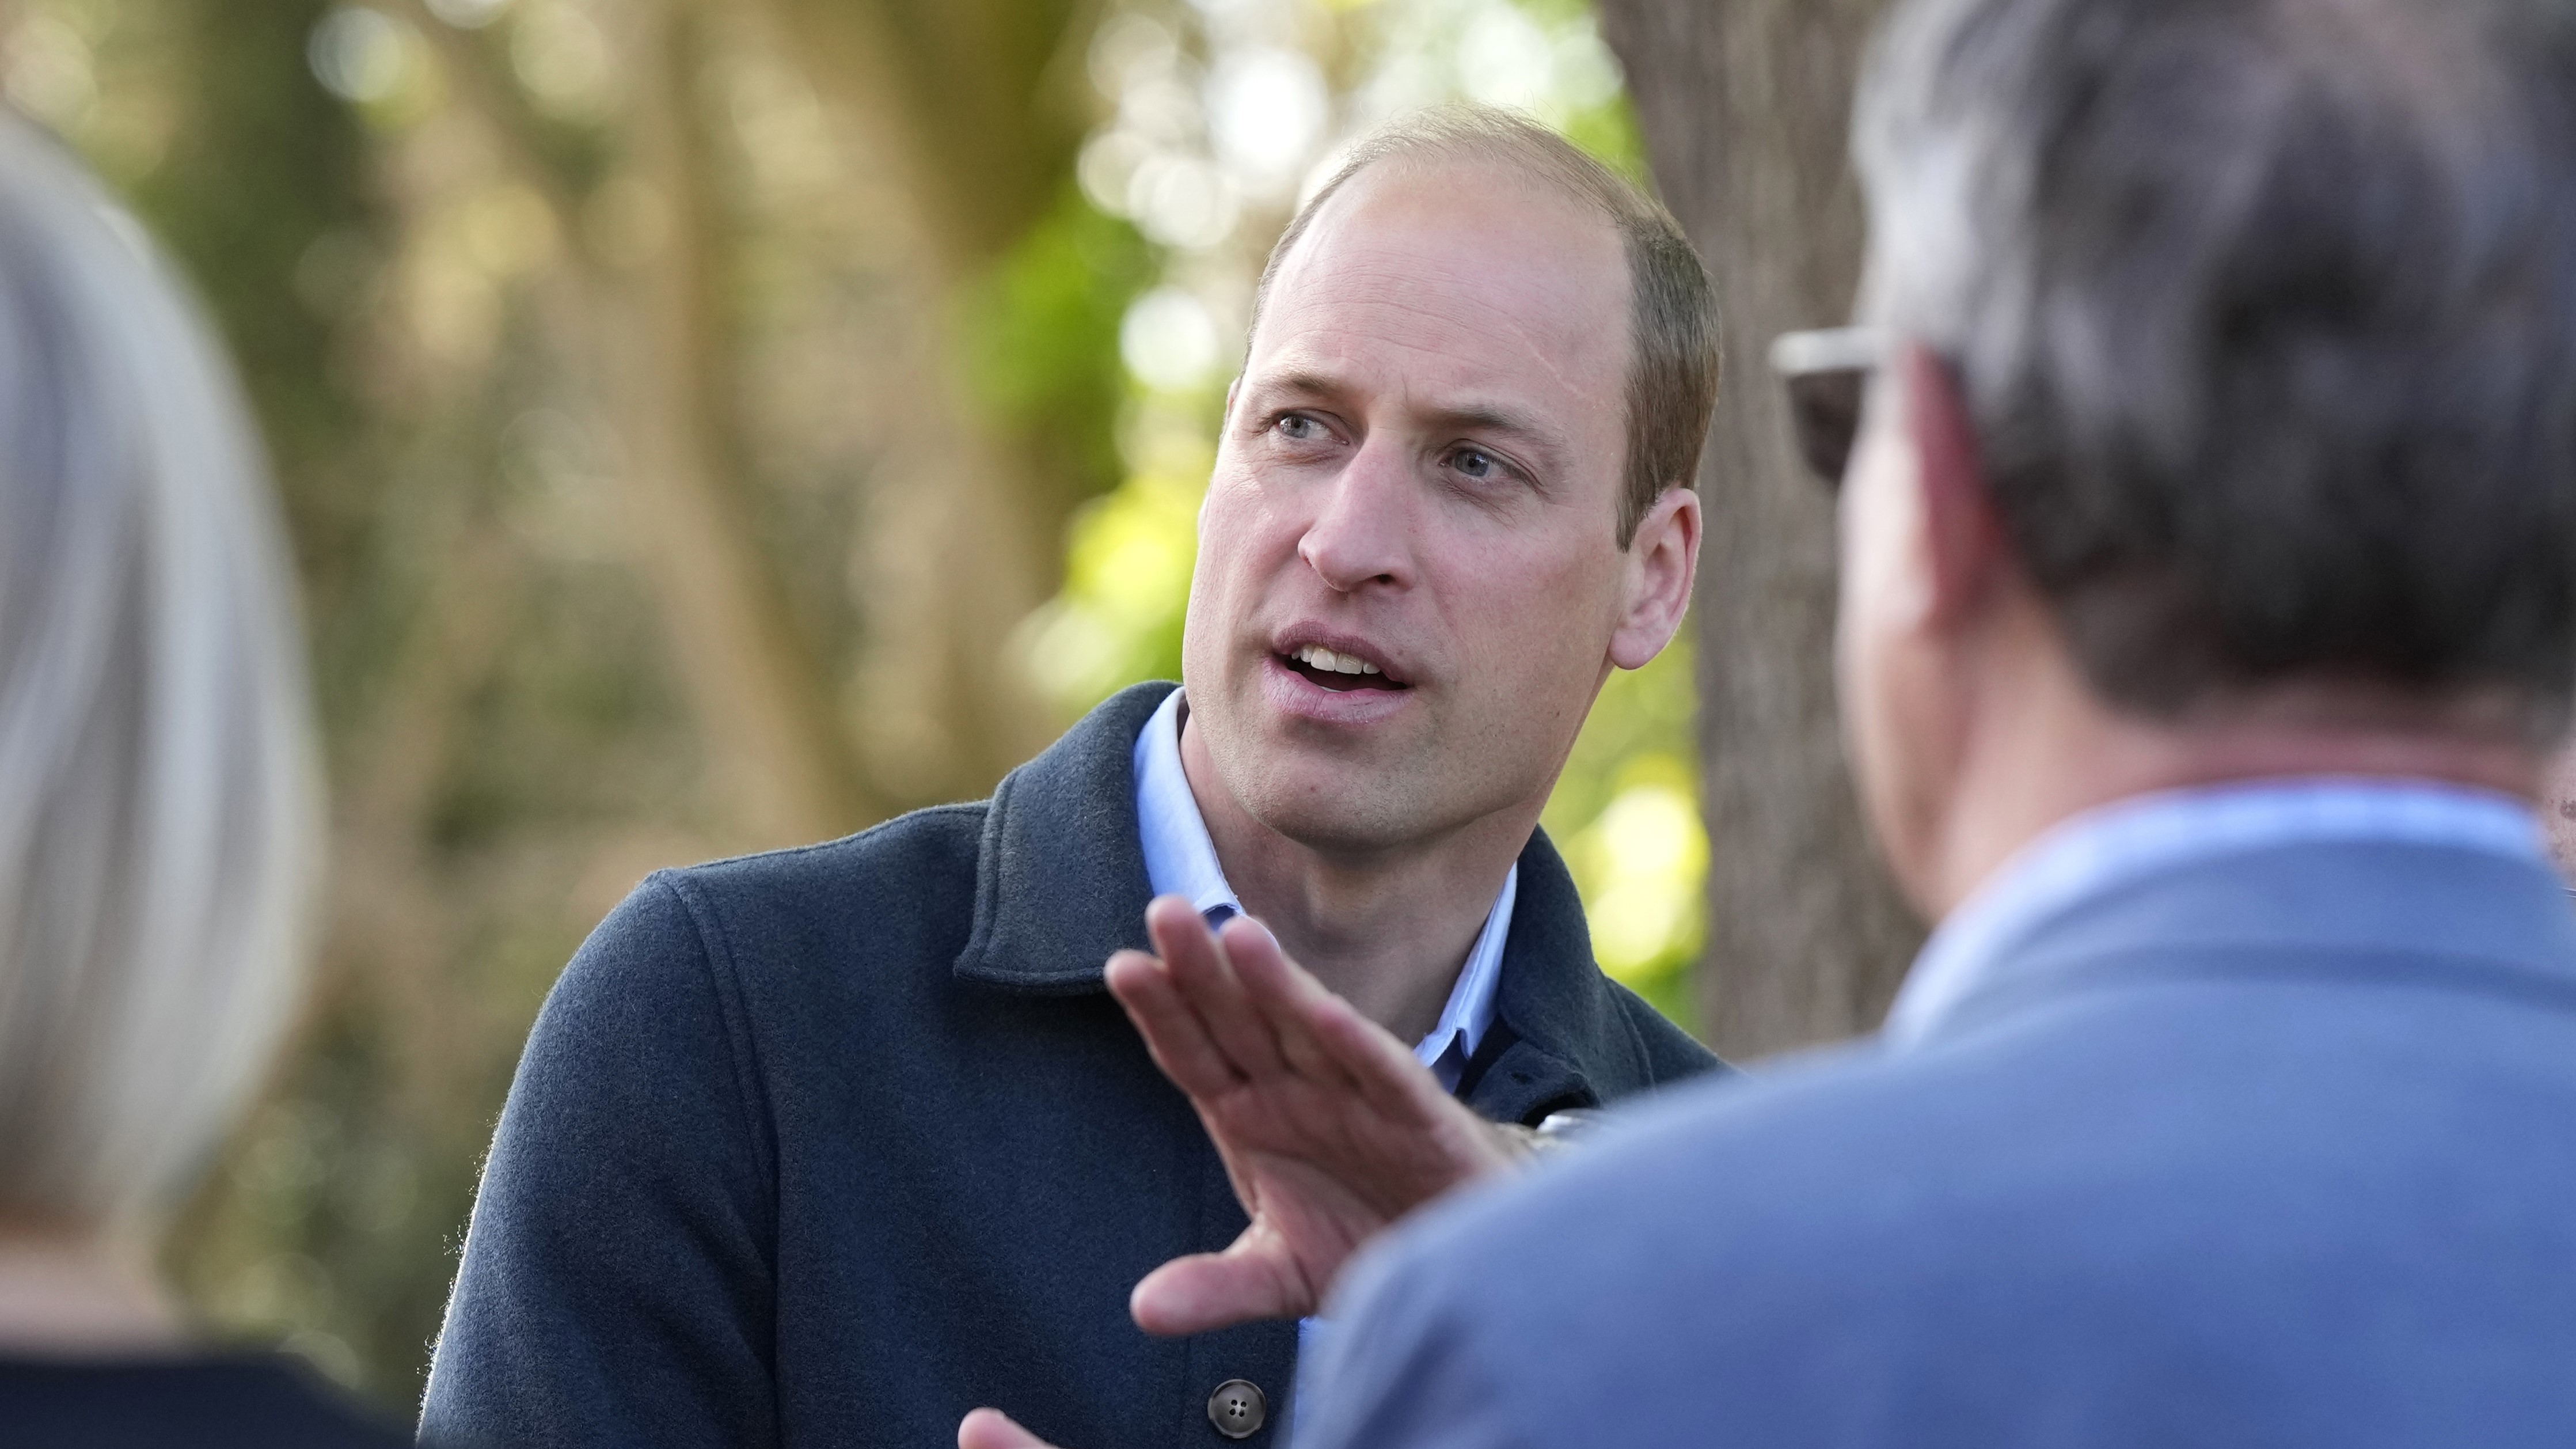 Vincent McAviney: UK Correspondent on Prince William's return to royal duties since Kate's cancer diagnosis